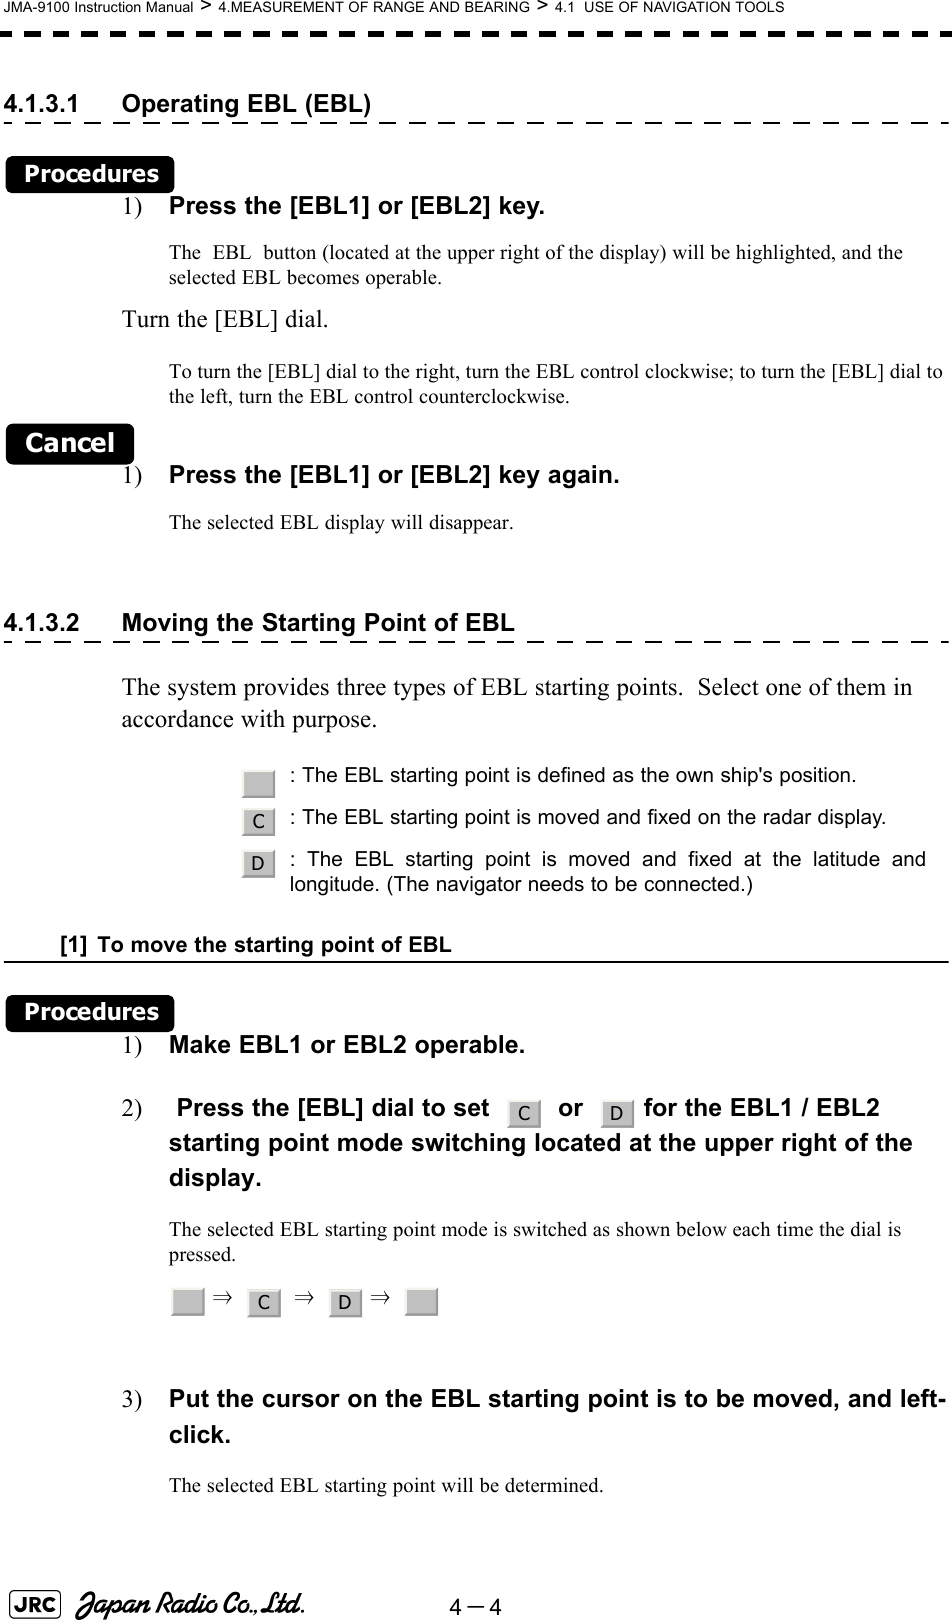 4－4JMA-9100 Instruction Manual &gt; 4.MEASUREMENT OF RANGE AND BEARING &gt; 4.1  USE OF NAVIGATION TOOLS4.1.3.1 Operating EBL (EBL)Procedures1) Press the [EBL1] or [EBL2] key.The  EBL  button (located at the upper right of the display) will be highlighted, and the selected EBL becomes operable.Turn the [EBL] dial.To turn the [EBL] dial to the right, turn the EBL control clockwise; to turn the [EBL] dial to the left, turn the EBL control counterclockwise.Cancel1) Press the [EBL1] or [EBL2] key again.The selected EBL display will disappear.4.1.3.2 Moving the Starting Point of EBLThe system provides three types of EBL starting points.  Select one of them in accordance with purpose.[1] To move the starting point of EBLProcedures1) Make EBL1 or EBL2 operable.2)  Press the [EBL] dial to set     or    for the EBL1 / EBL2 starting point mode switching located at the upper right of the display.The selected EBL starting point mode is switched as shown below each time the dial is pressed. ⇒     ⇒    ⇒  3) Put the cursor on the EBL starting point is to be moved, and left-click.The selected EBL starting point will be determined.   : The EBL starting point is defined as the own ship&apos;s position.: The EBL starting point is moved and fixed on the radar display.: The EBL starting point is moved and fixed at the latitude andlongitude. (The navigator needs to be connected.)_CDC D_C D _